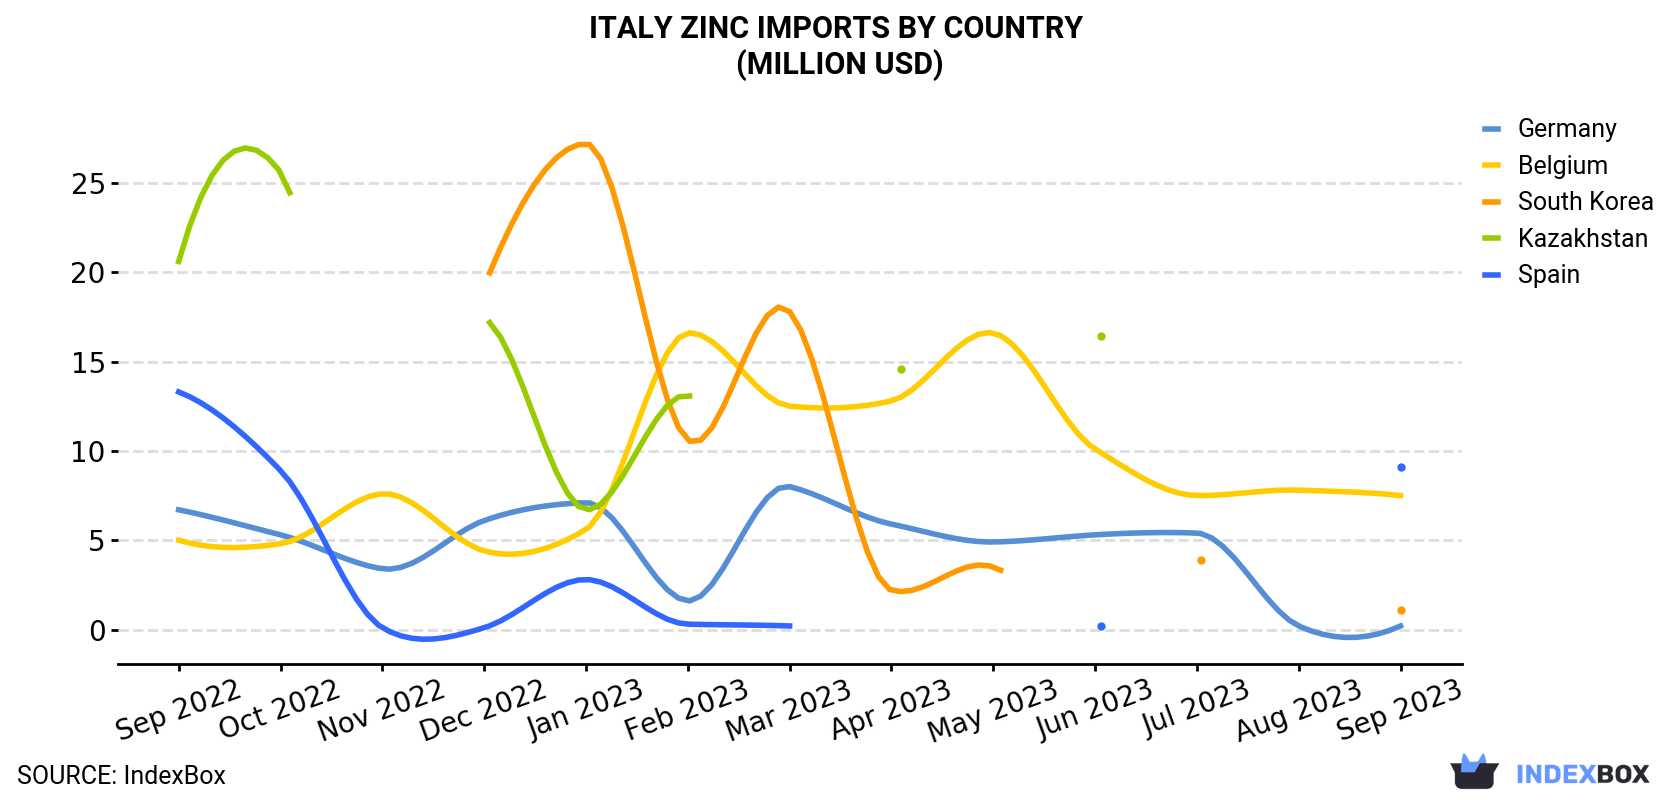 Italy Zinc Imports By Country (Million USD)